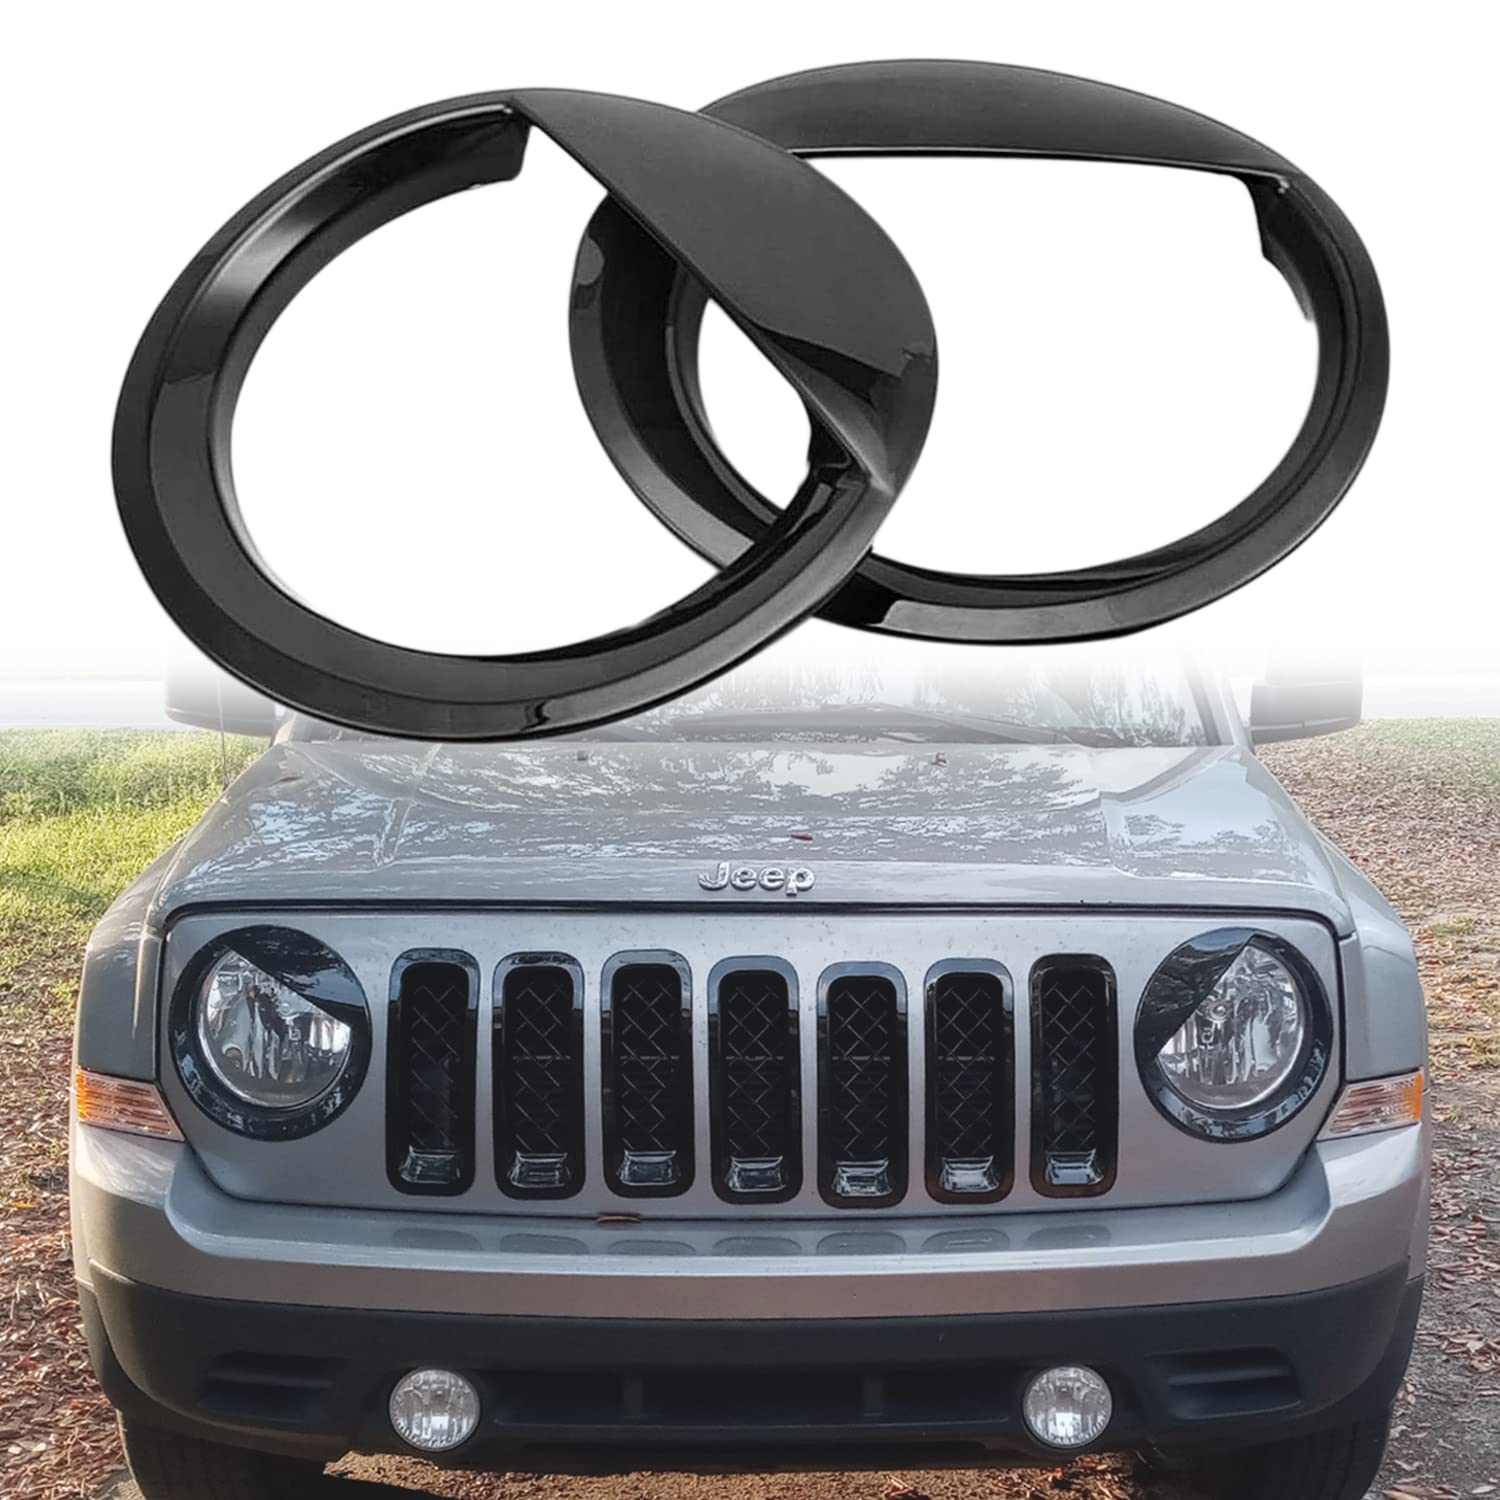 Amazon.com: for Jeep Accessories Bezels Front Light Headlight Angry Bird  Style Trim Cover ABS Compatible with Jeep Patriot 2011-2017 Model Mods  Decor (Black) : Automotive